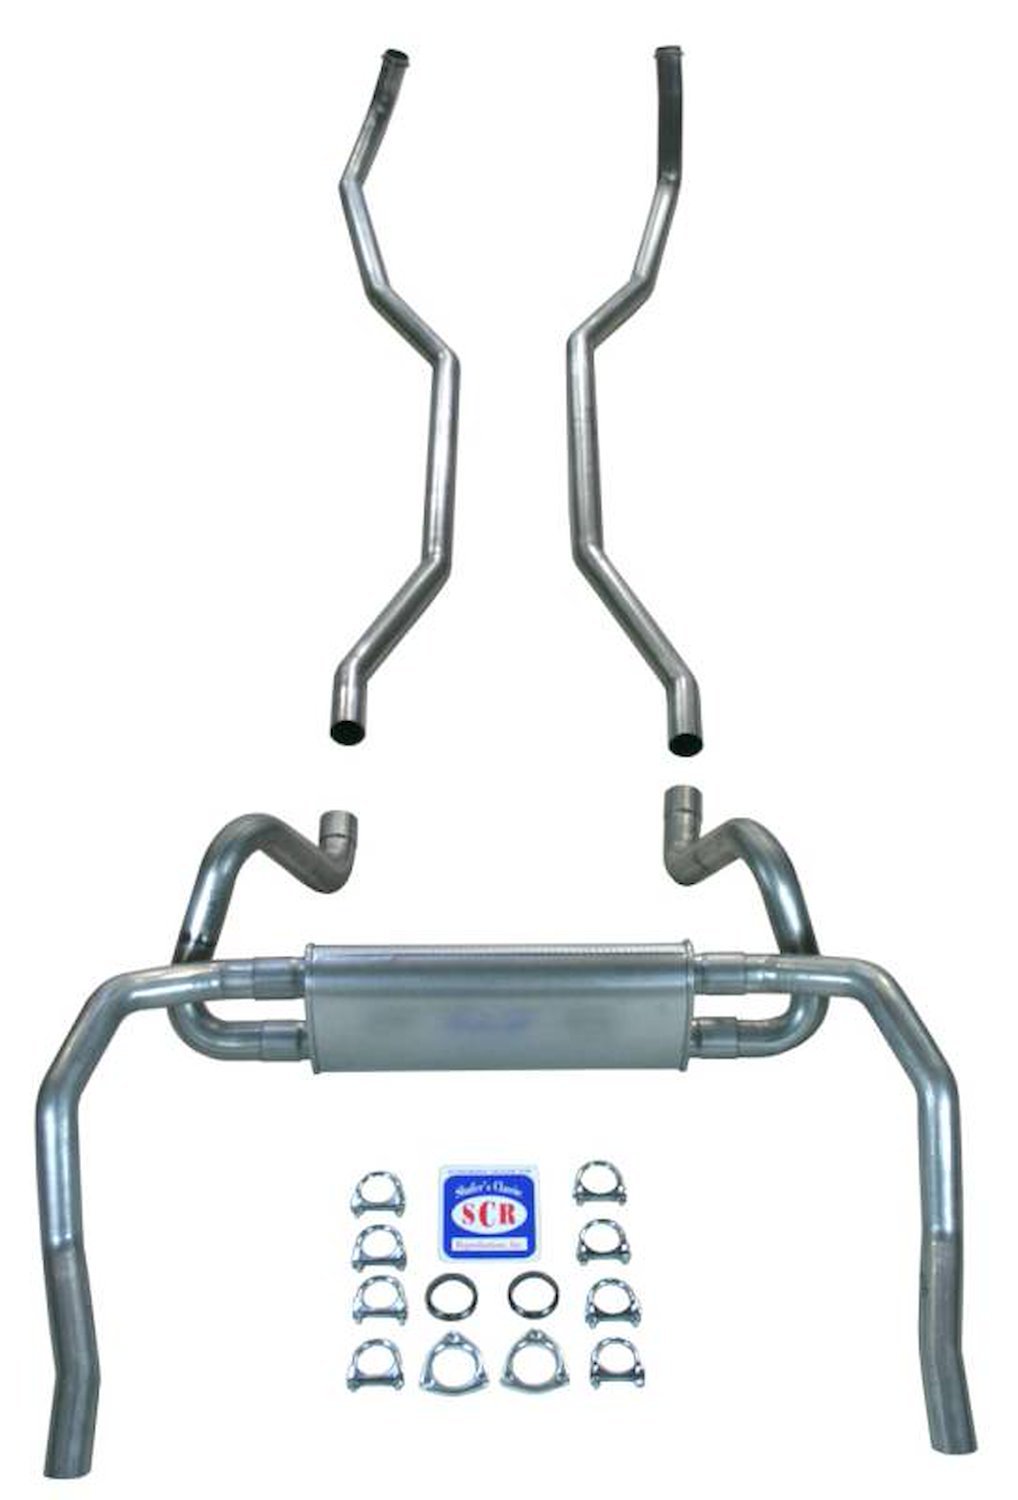 23014S 1967-1969 Camaro 2-1/2 in. Exhaust System w/ Big Block 2-1/2 in. Cast Iron Manifolds, 304 Stainless Steel